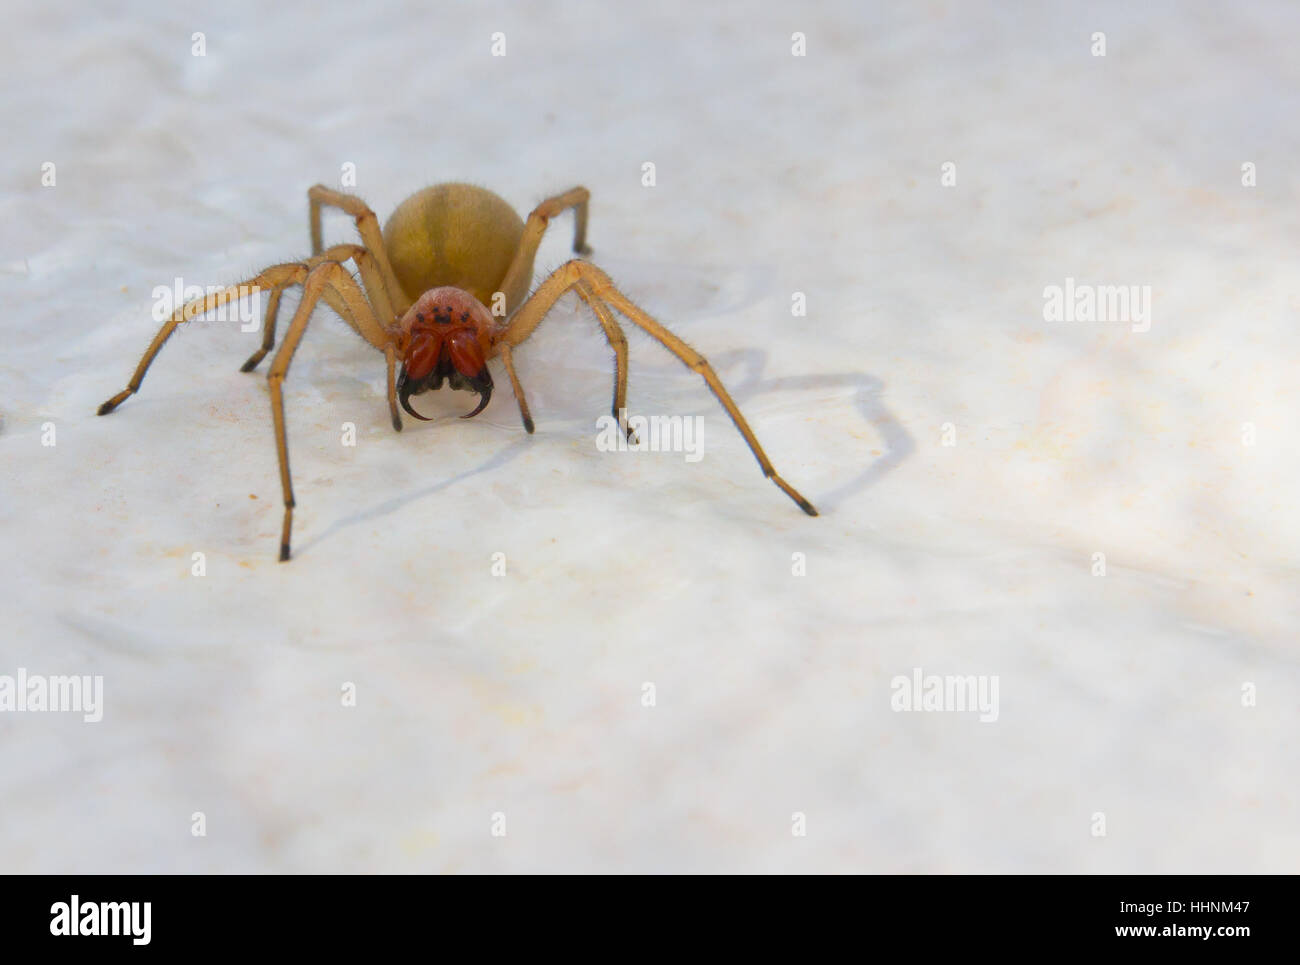 Spider with large fangs Stock Photo